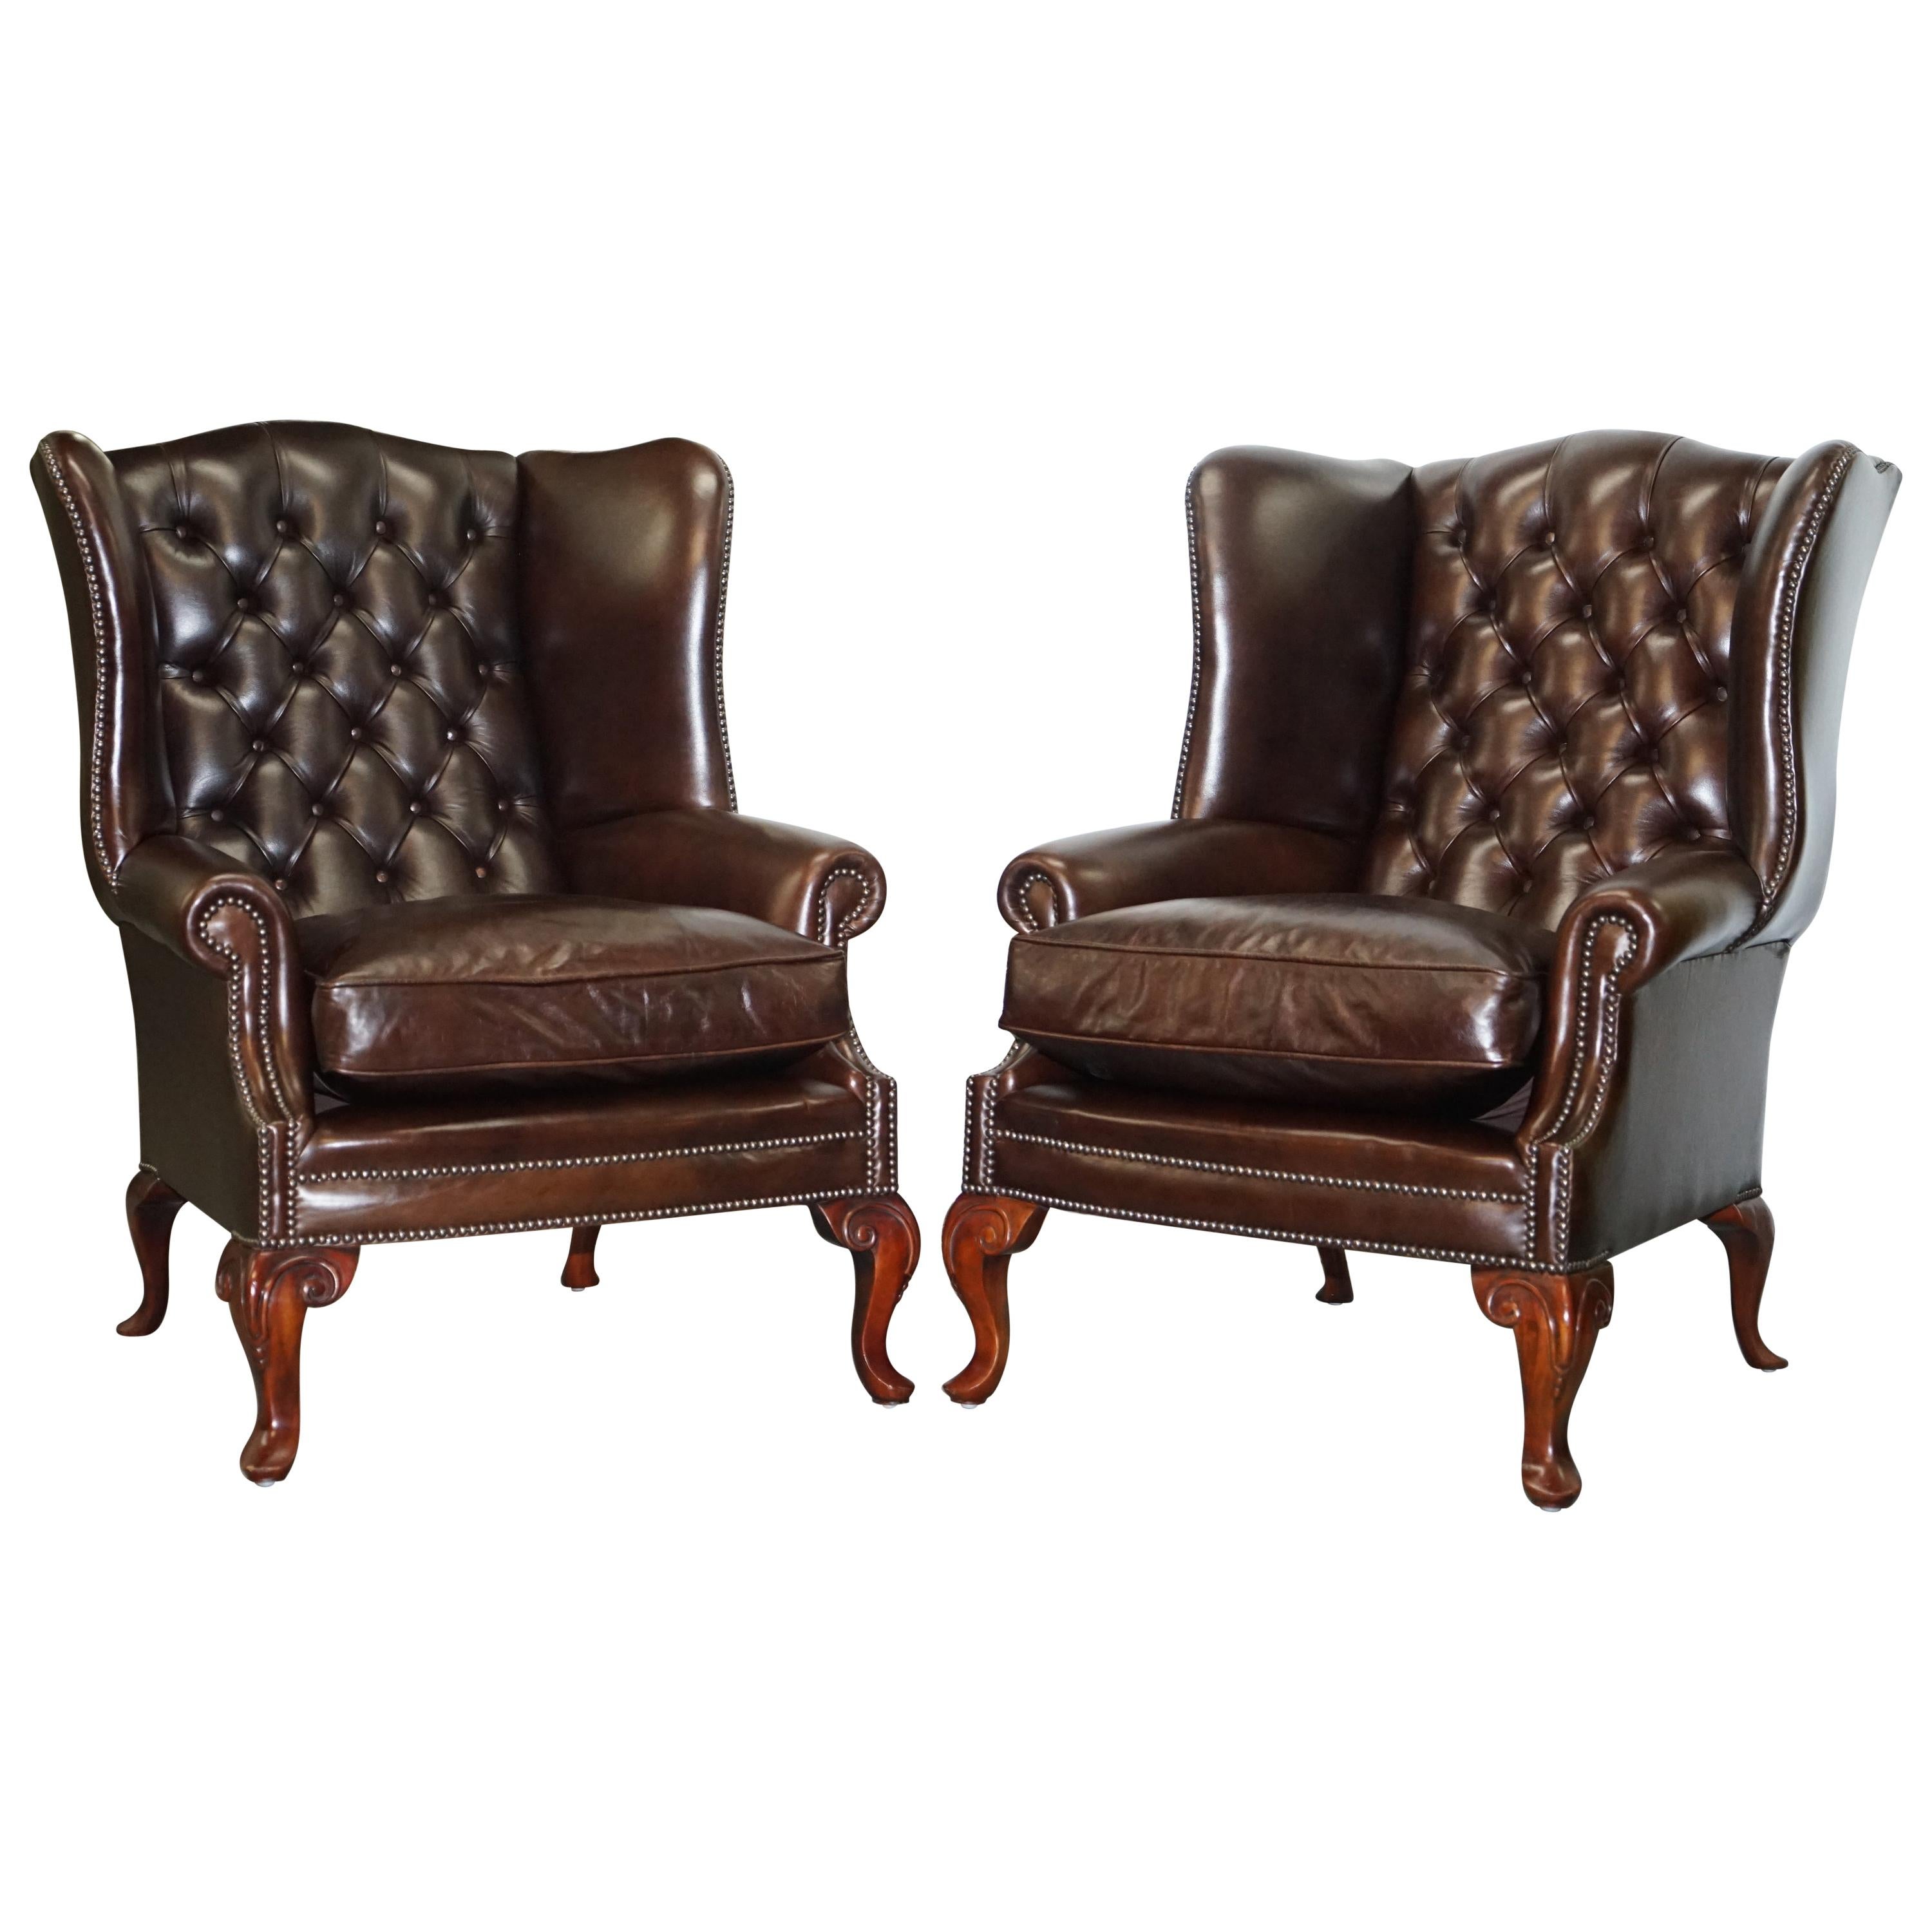 Pair of Vintage Chesterfield Tufted Heritage Brown Leather Wingback Armchairs